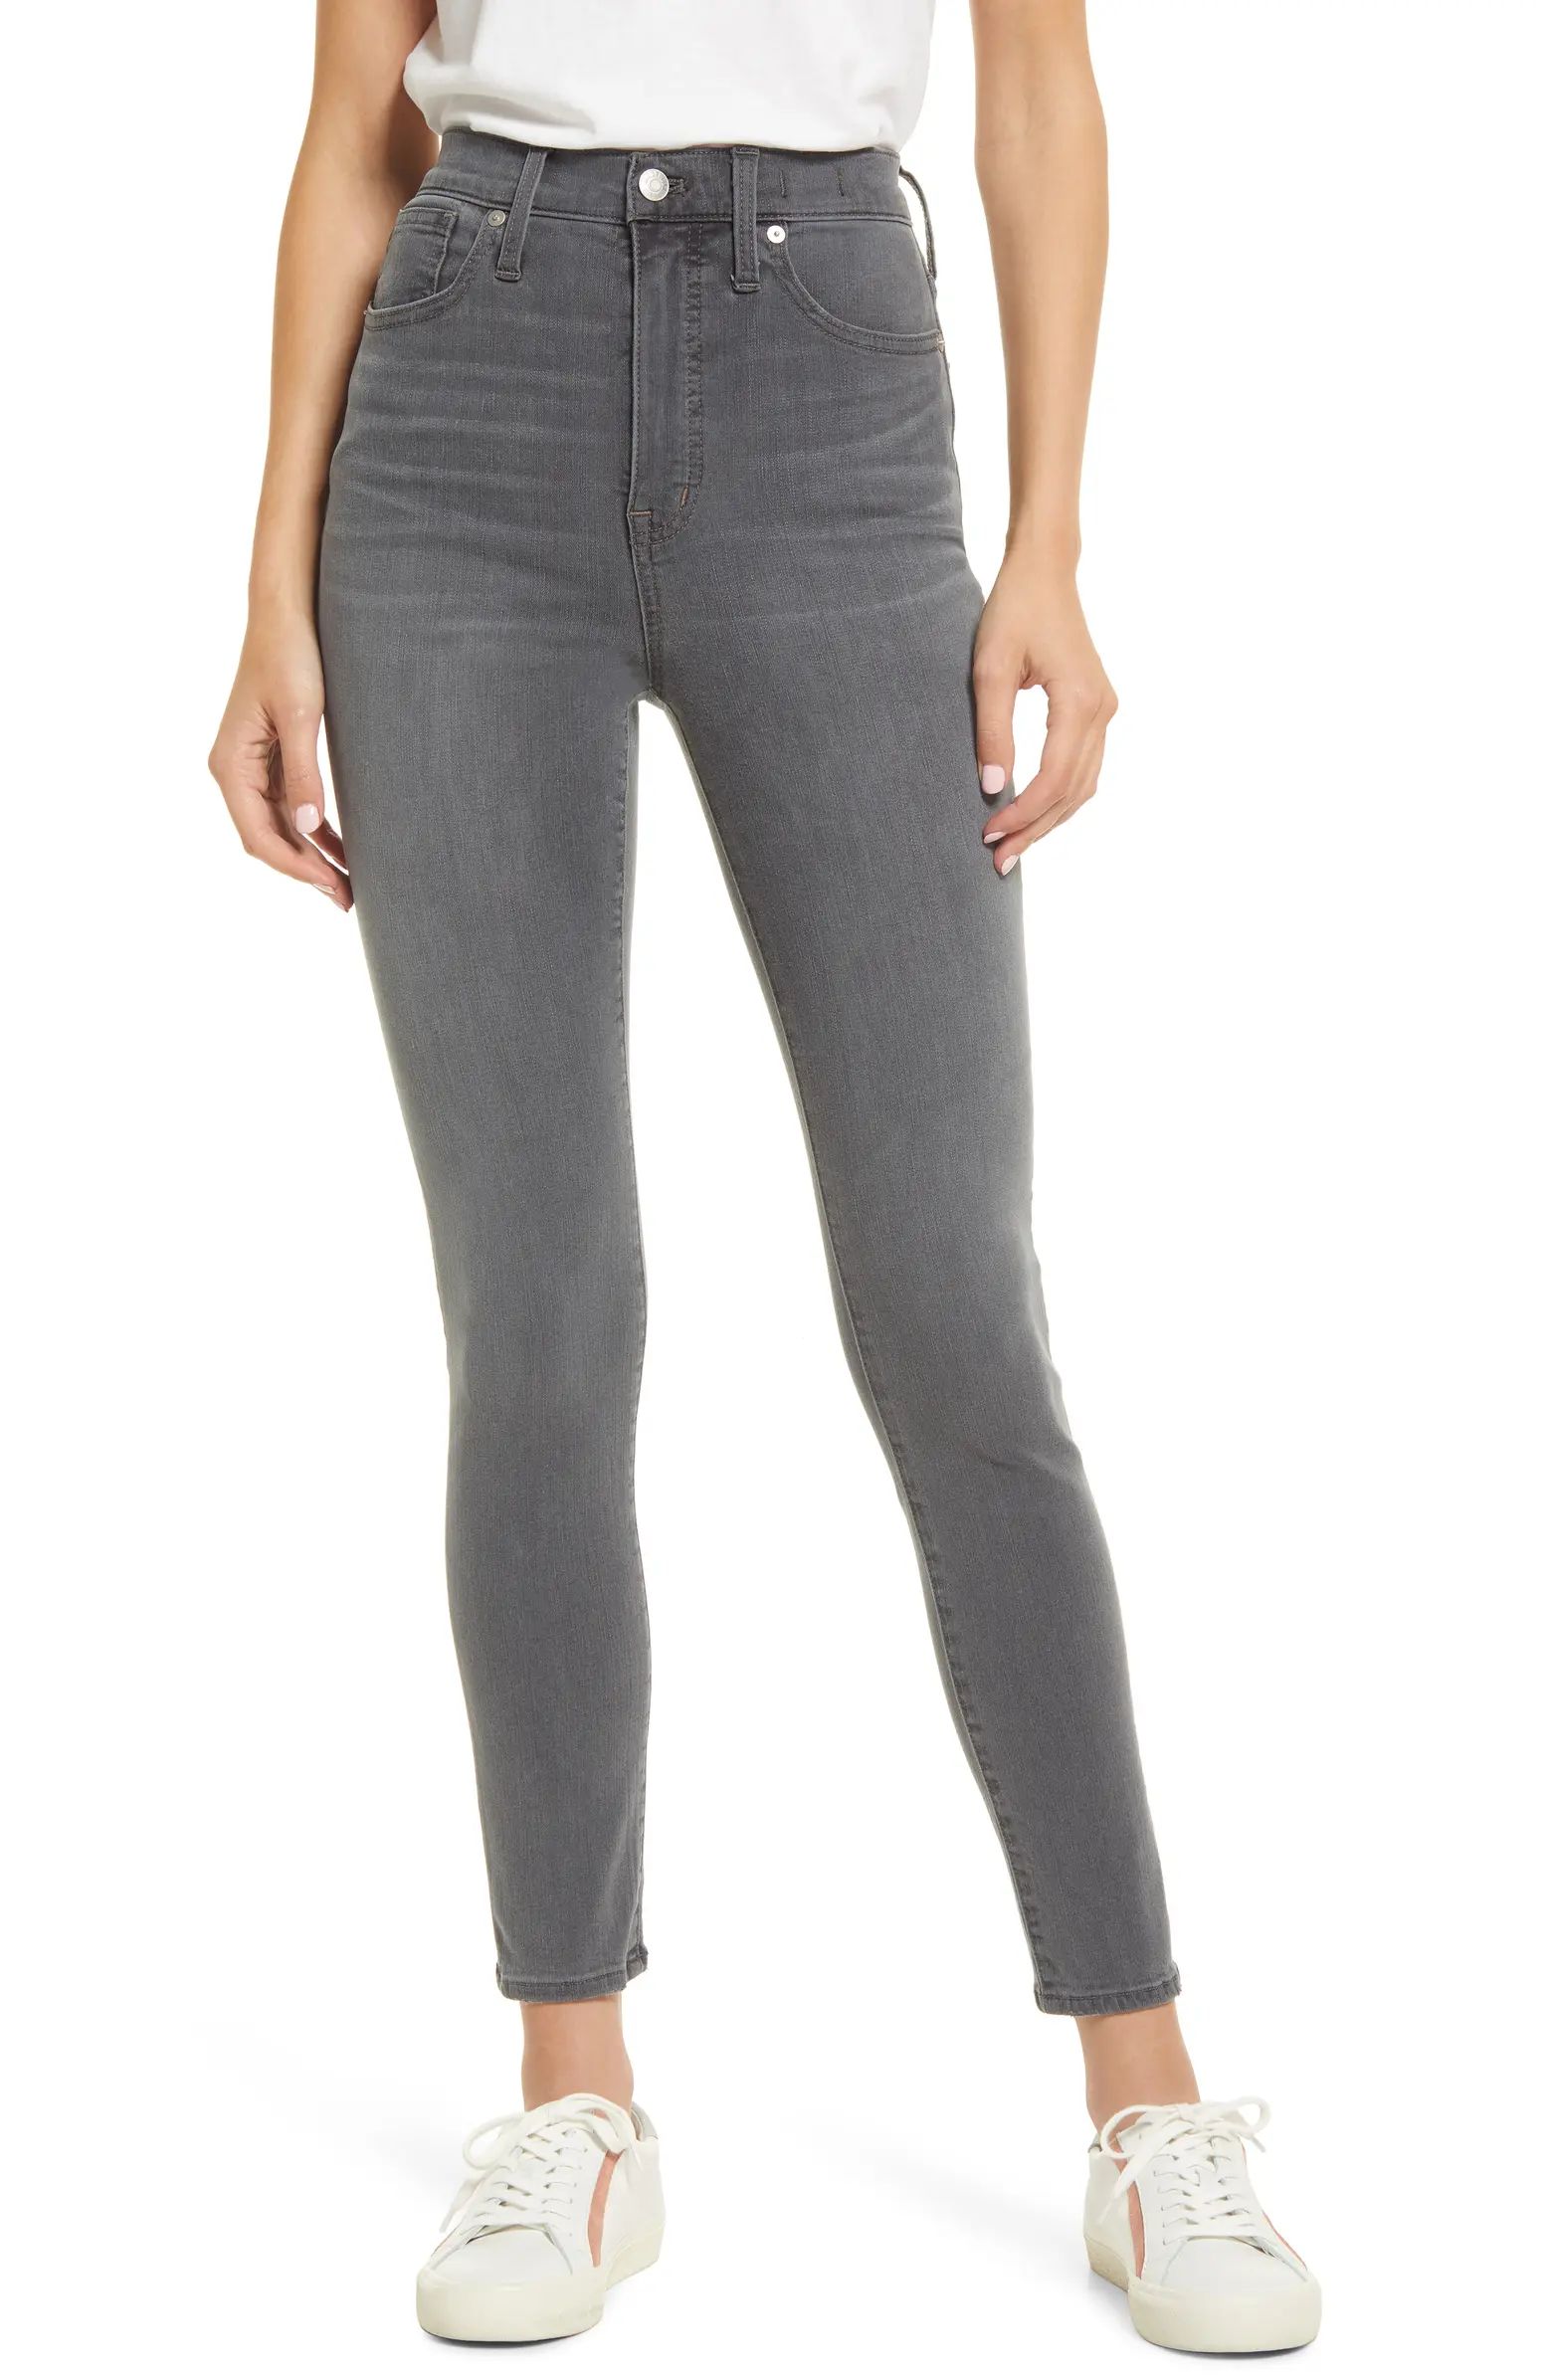 Madewell 11-Inch High Waist Skinny Jeans | Nordstrom | Nordstrom